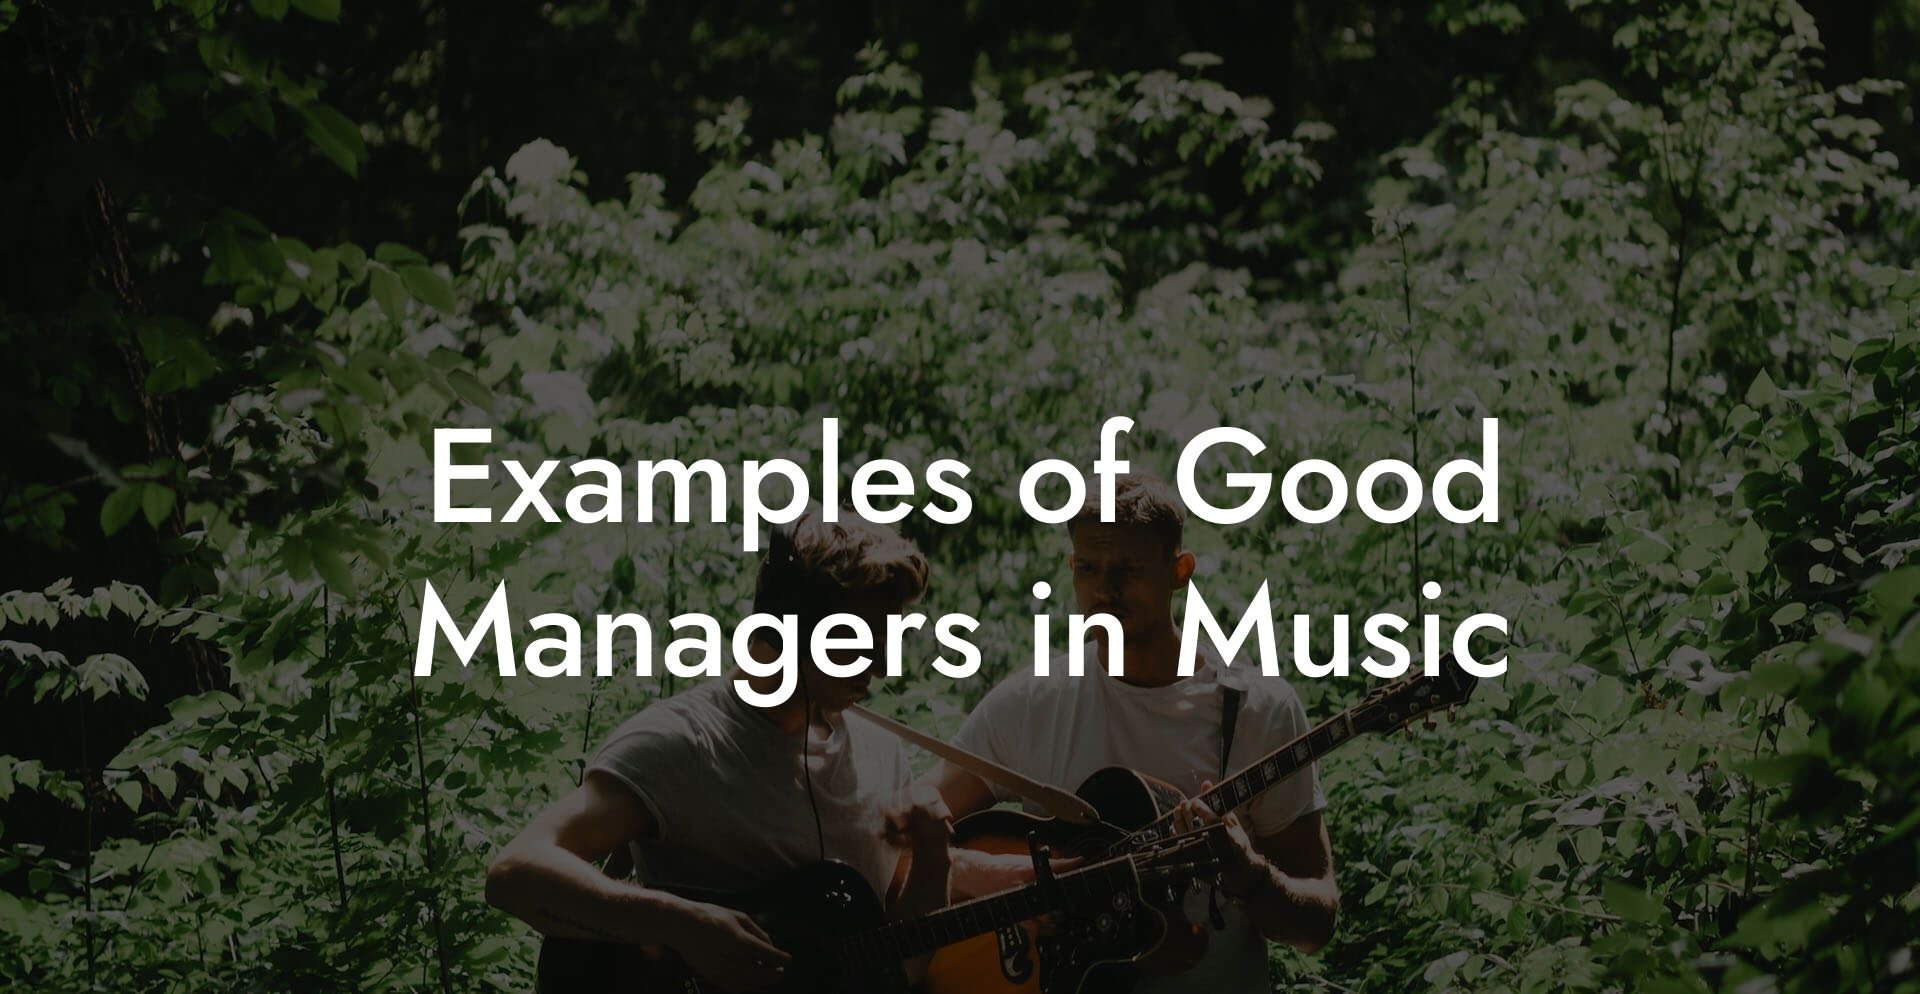 Examples of Good Managers in Music